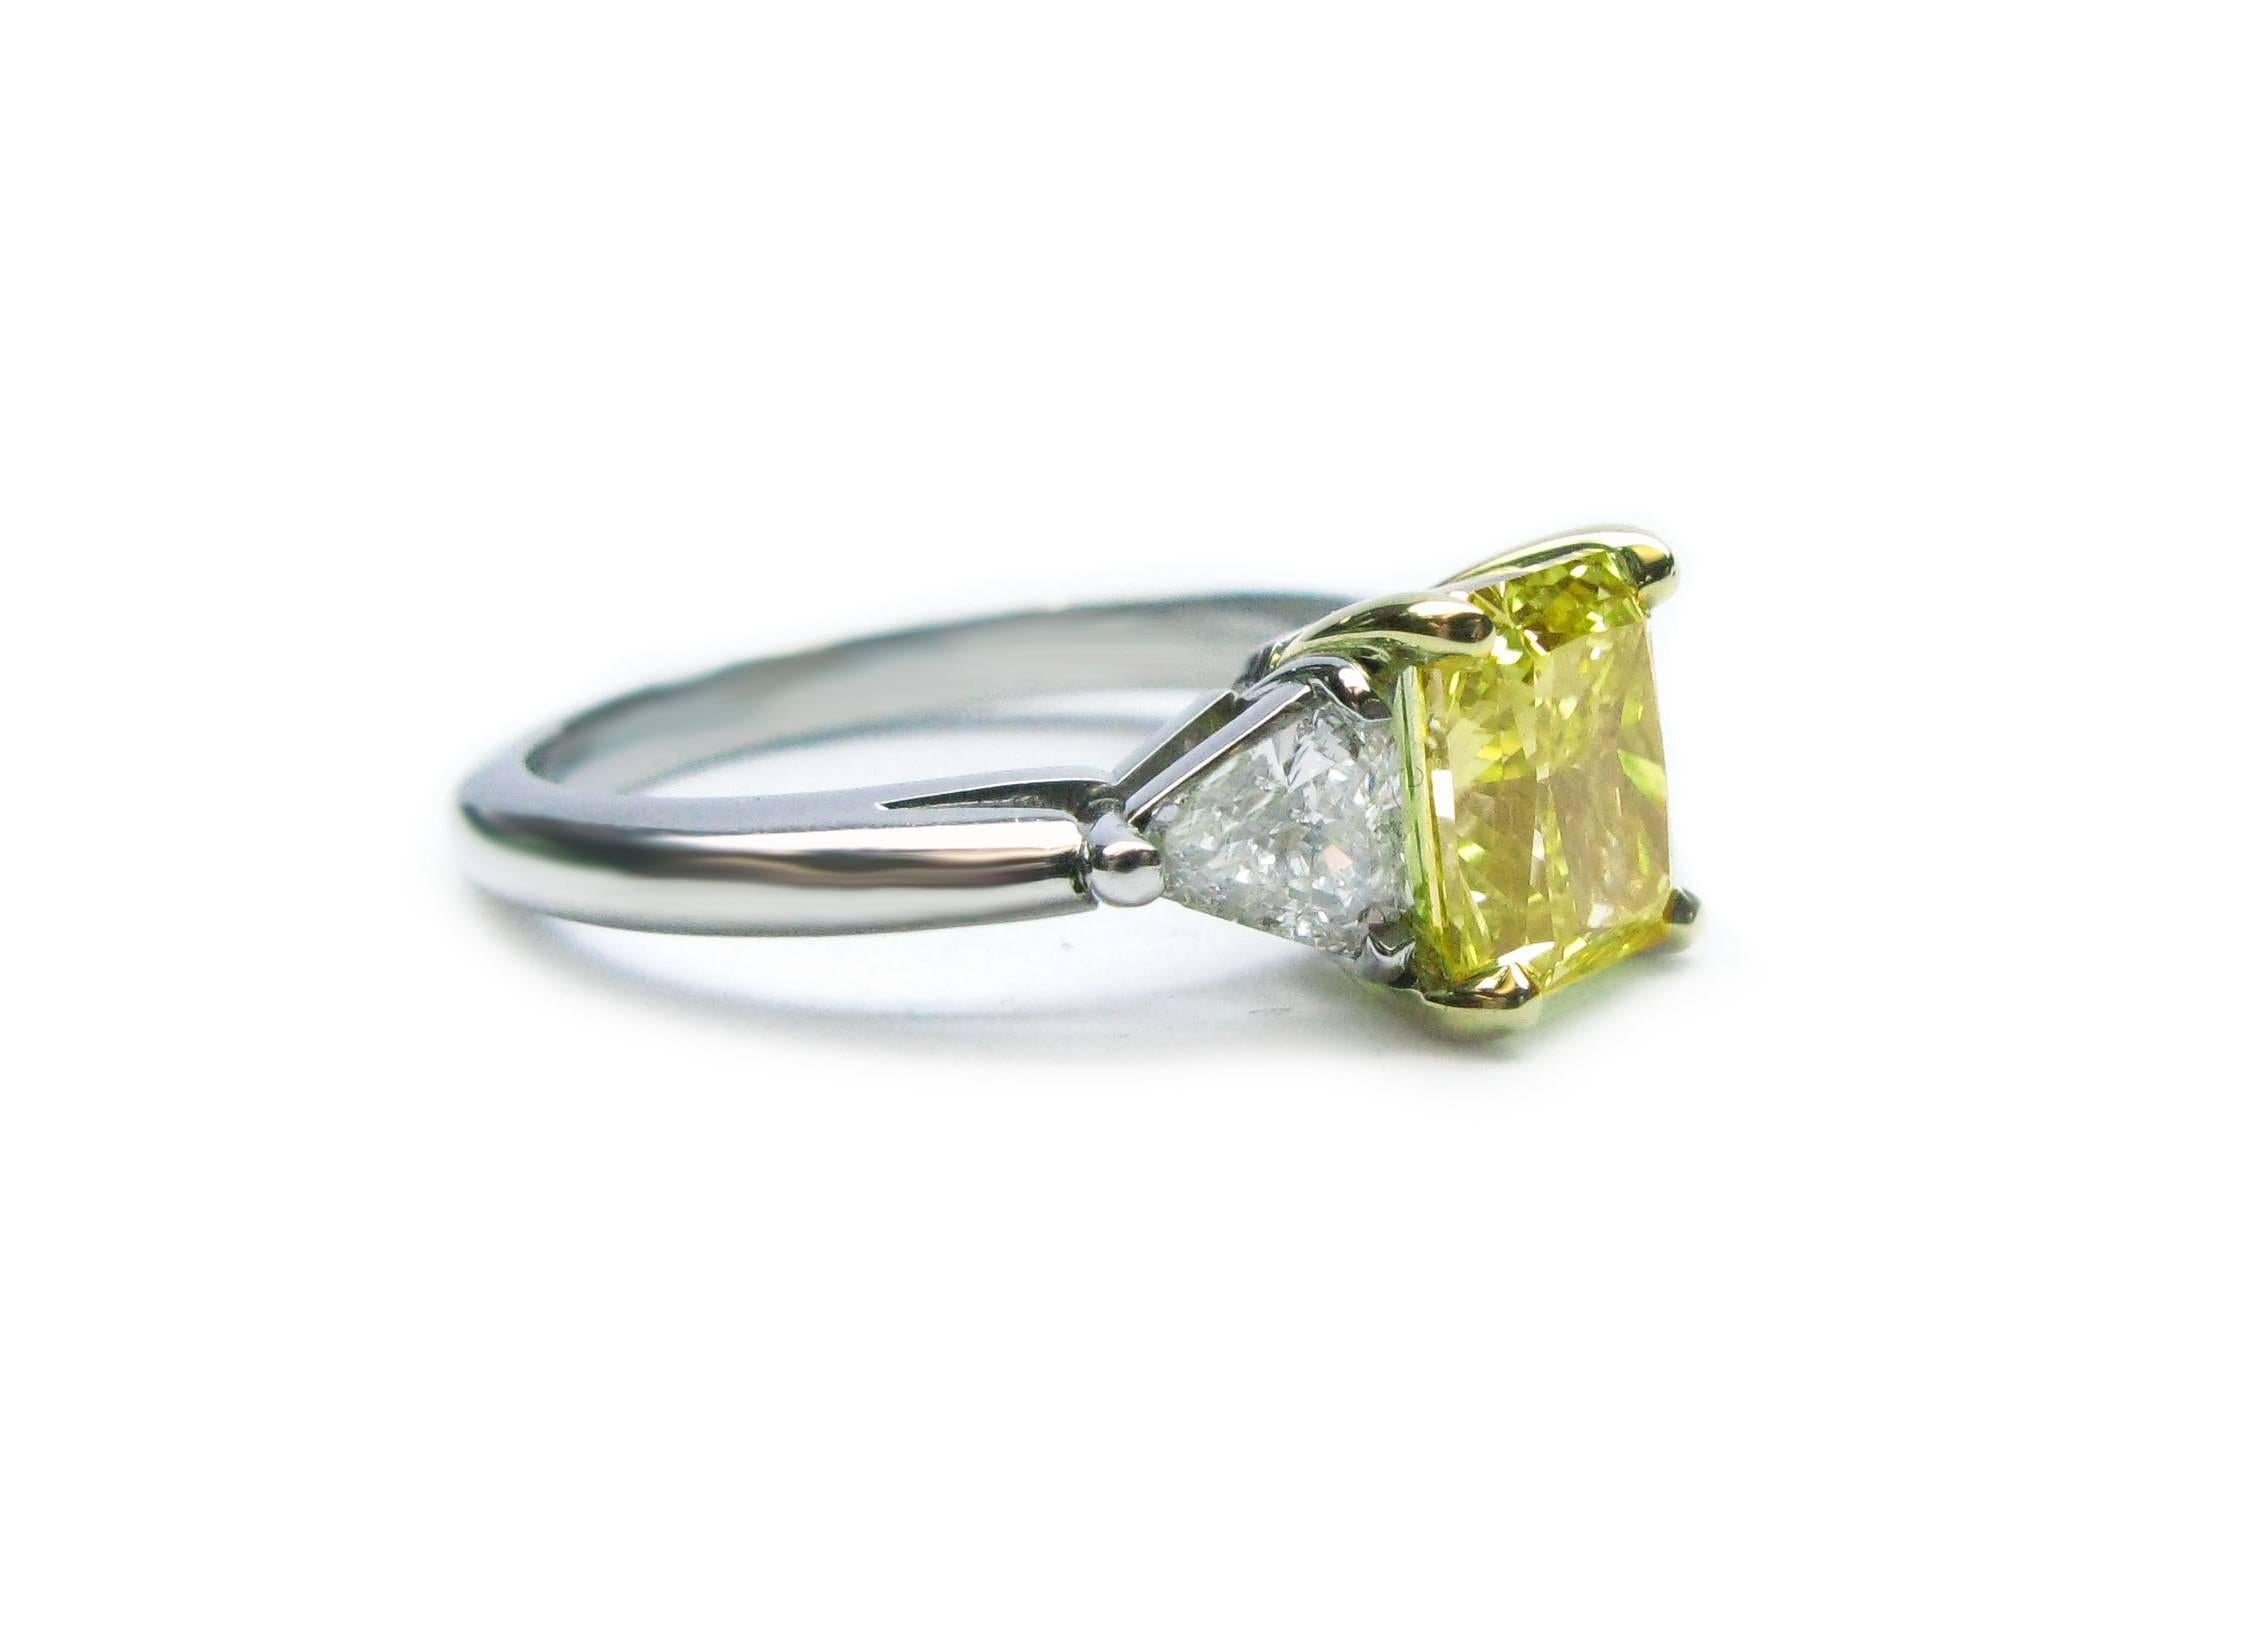 This piece is perfect for a collector with a discerning eye or anyone who loves to stand out in vibrant color! This gorgeous 1.74 carat radiant has been graded Fancy Vivid yellow color and I1 clarity by GIA. The color is beautifully saturated